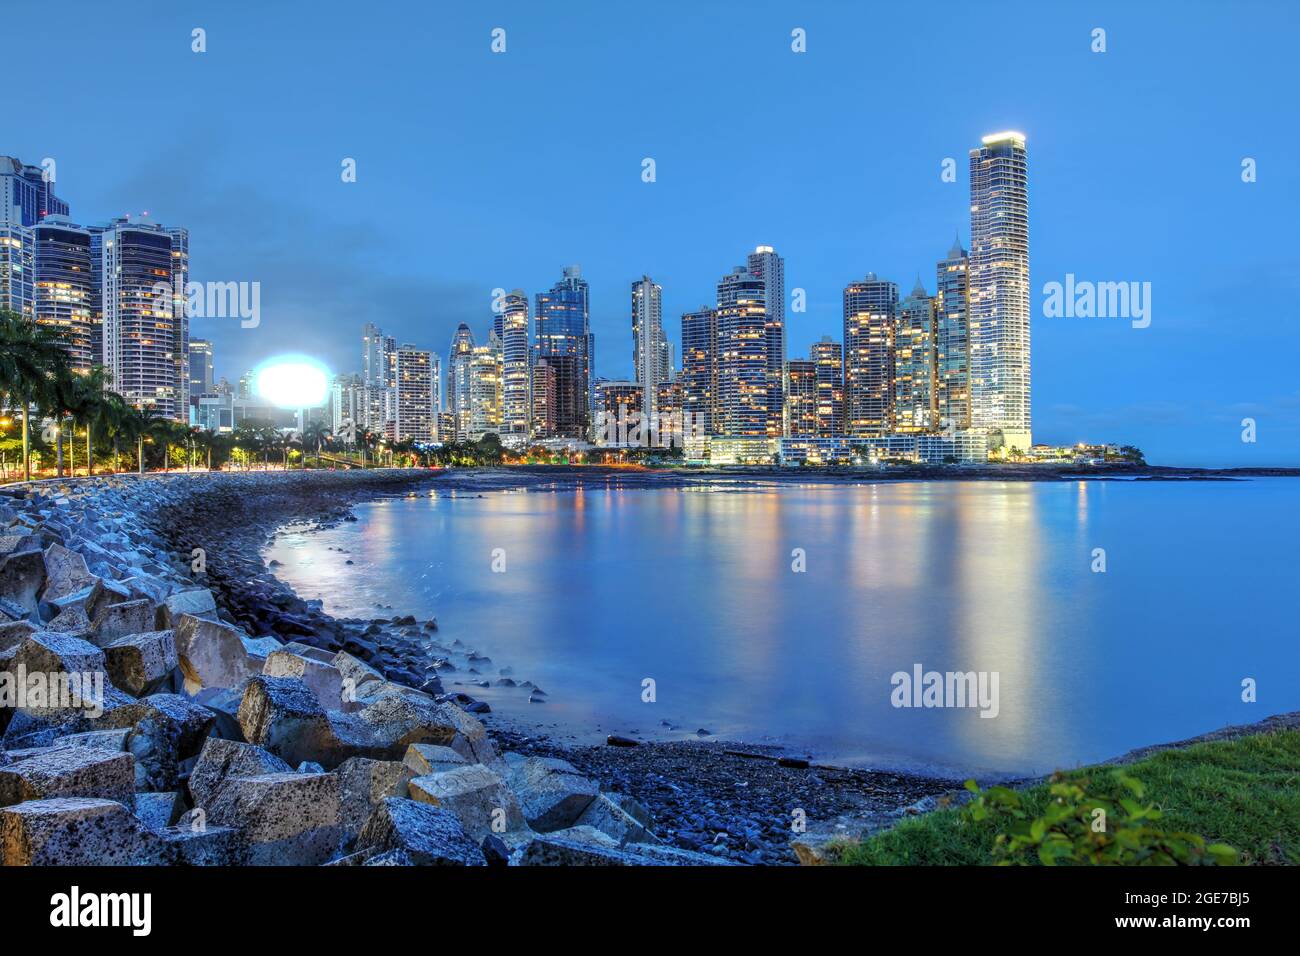 Night scene along the Cinta Costera towards the high-rise part of Panama City - Paitilla district. The beautiful skyline is framed in a little gulf. Stock Photo